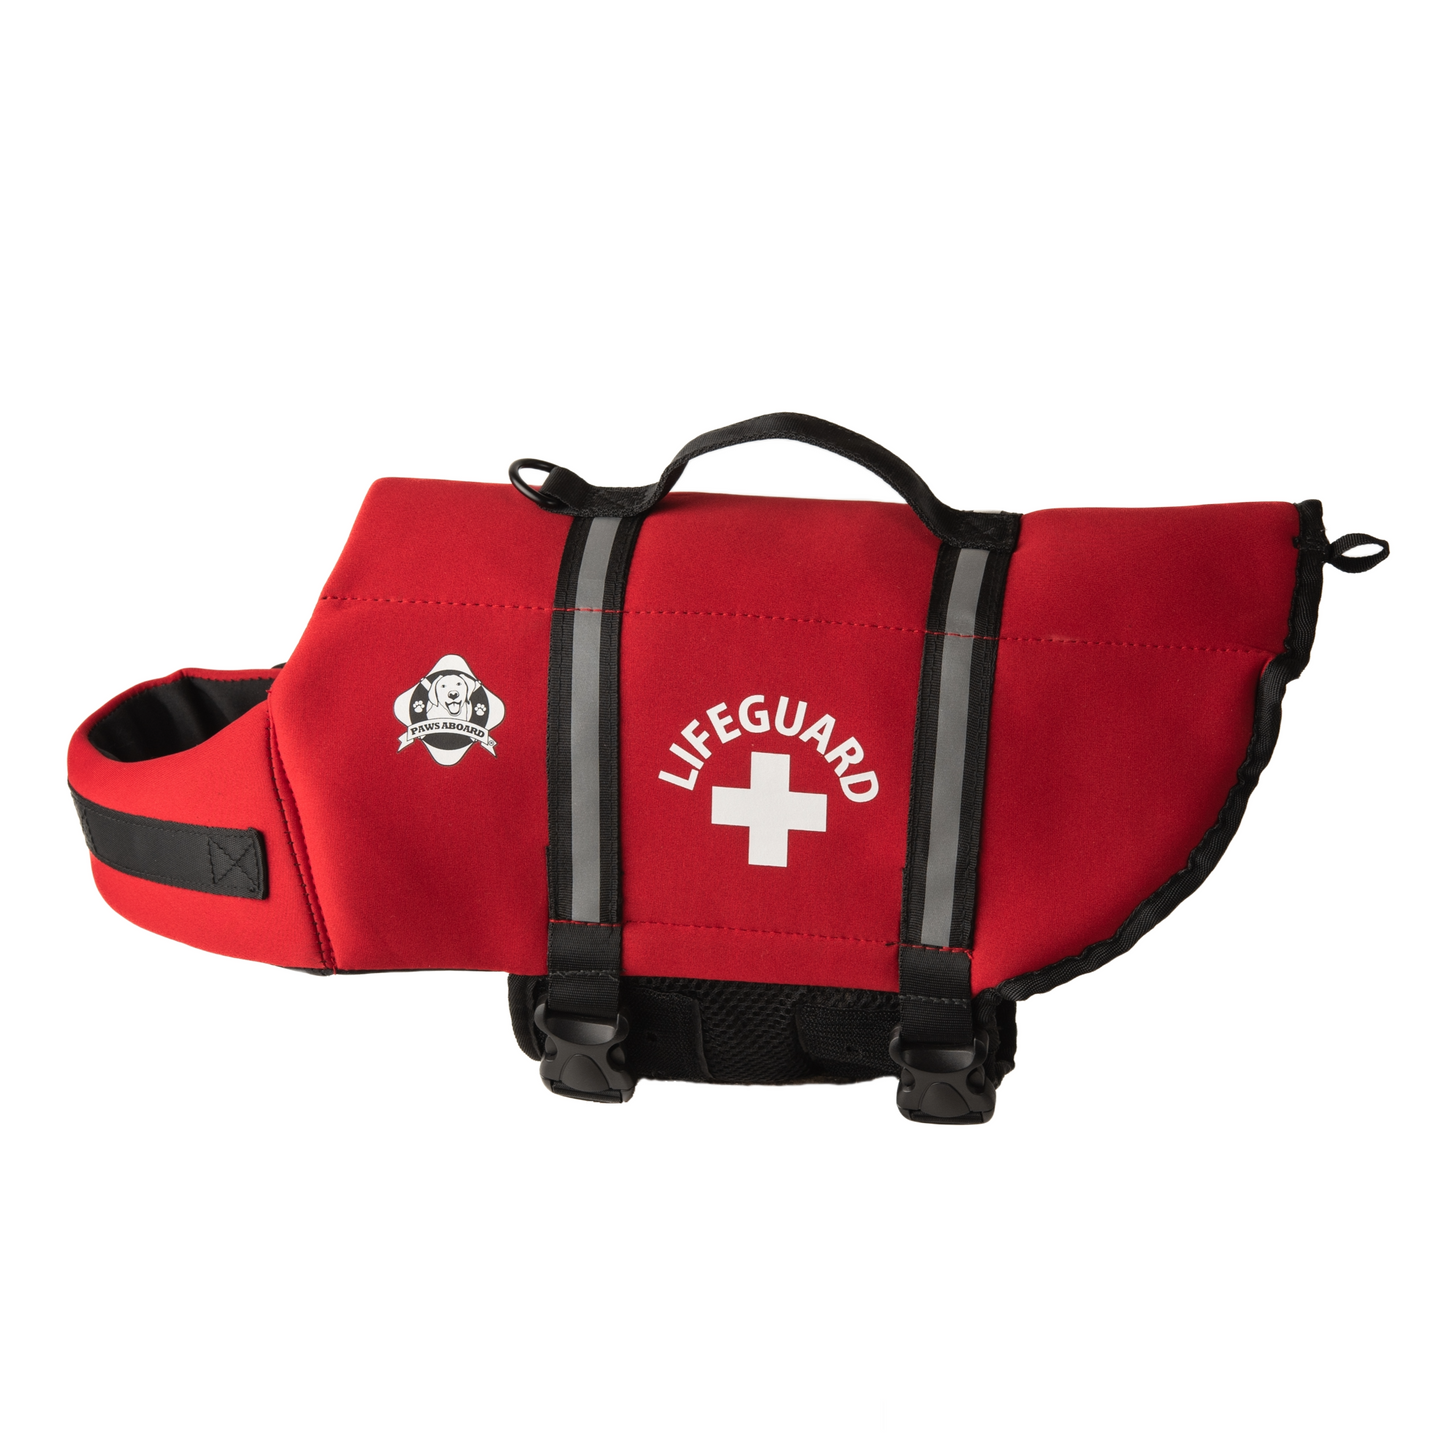 Red Lifeguard Paws Aboard dog life jacket by Fido Pet Products with reflective strips, breatheable mesh underbelly, and secure handle with leash clip at top.